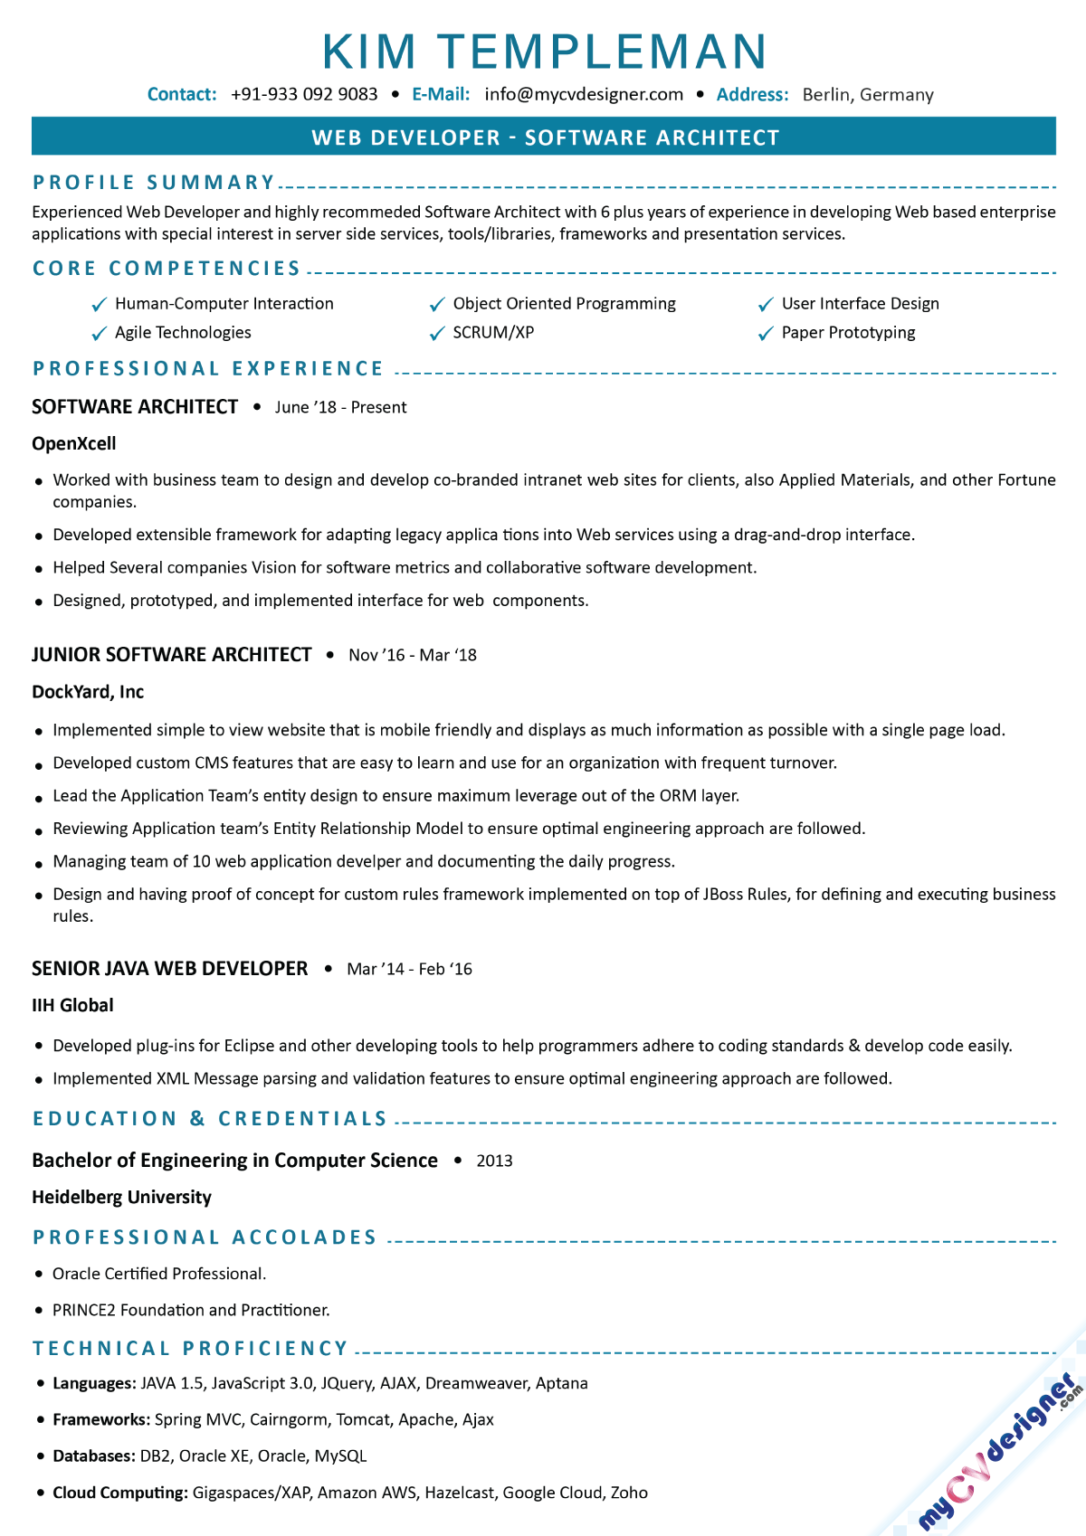 resume in text version